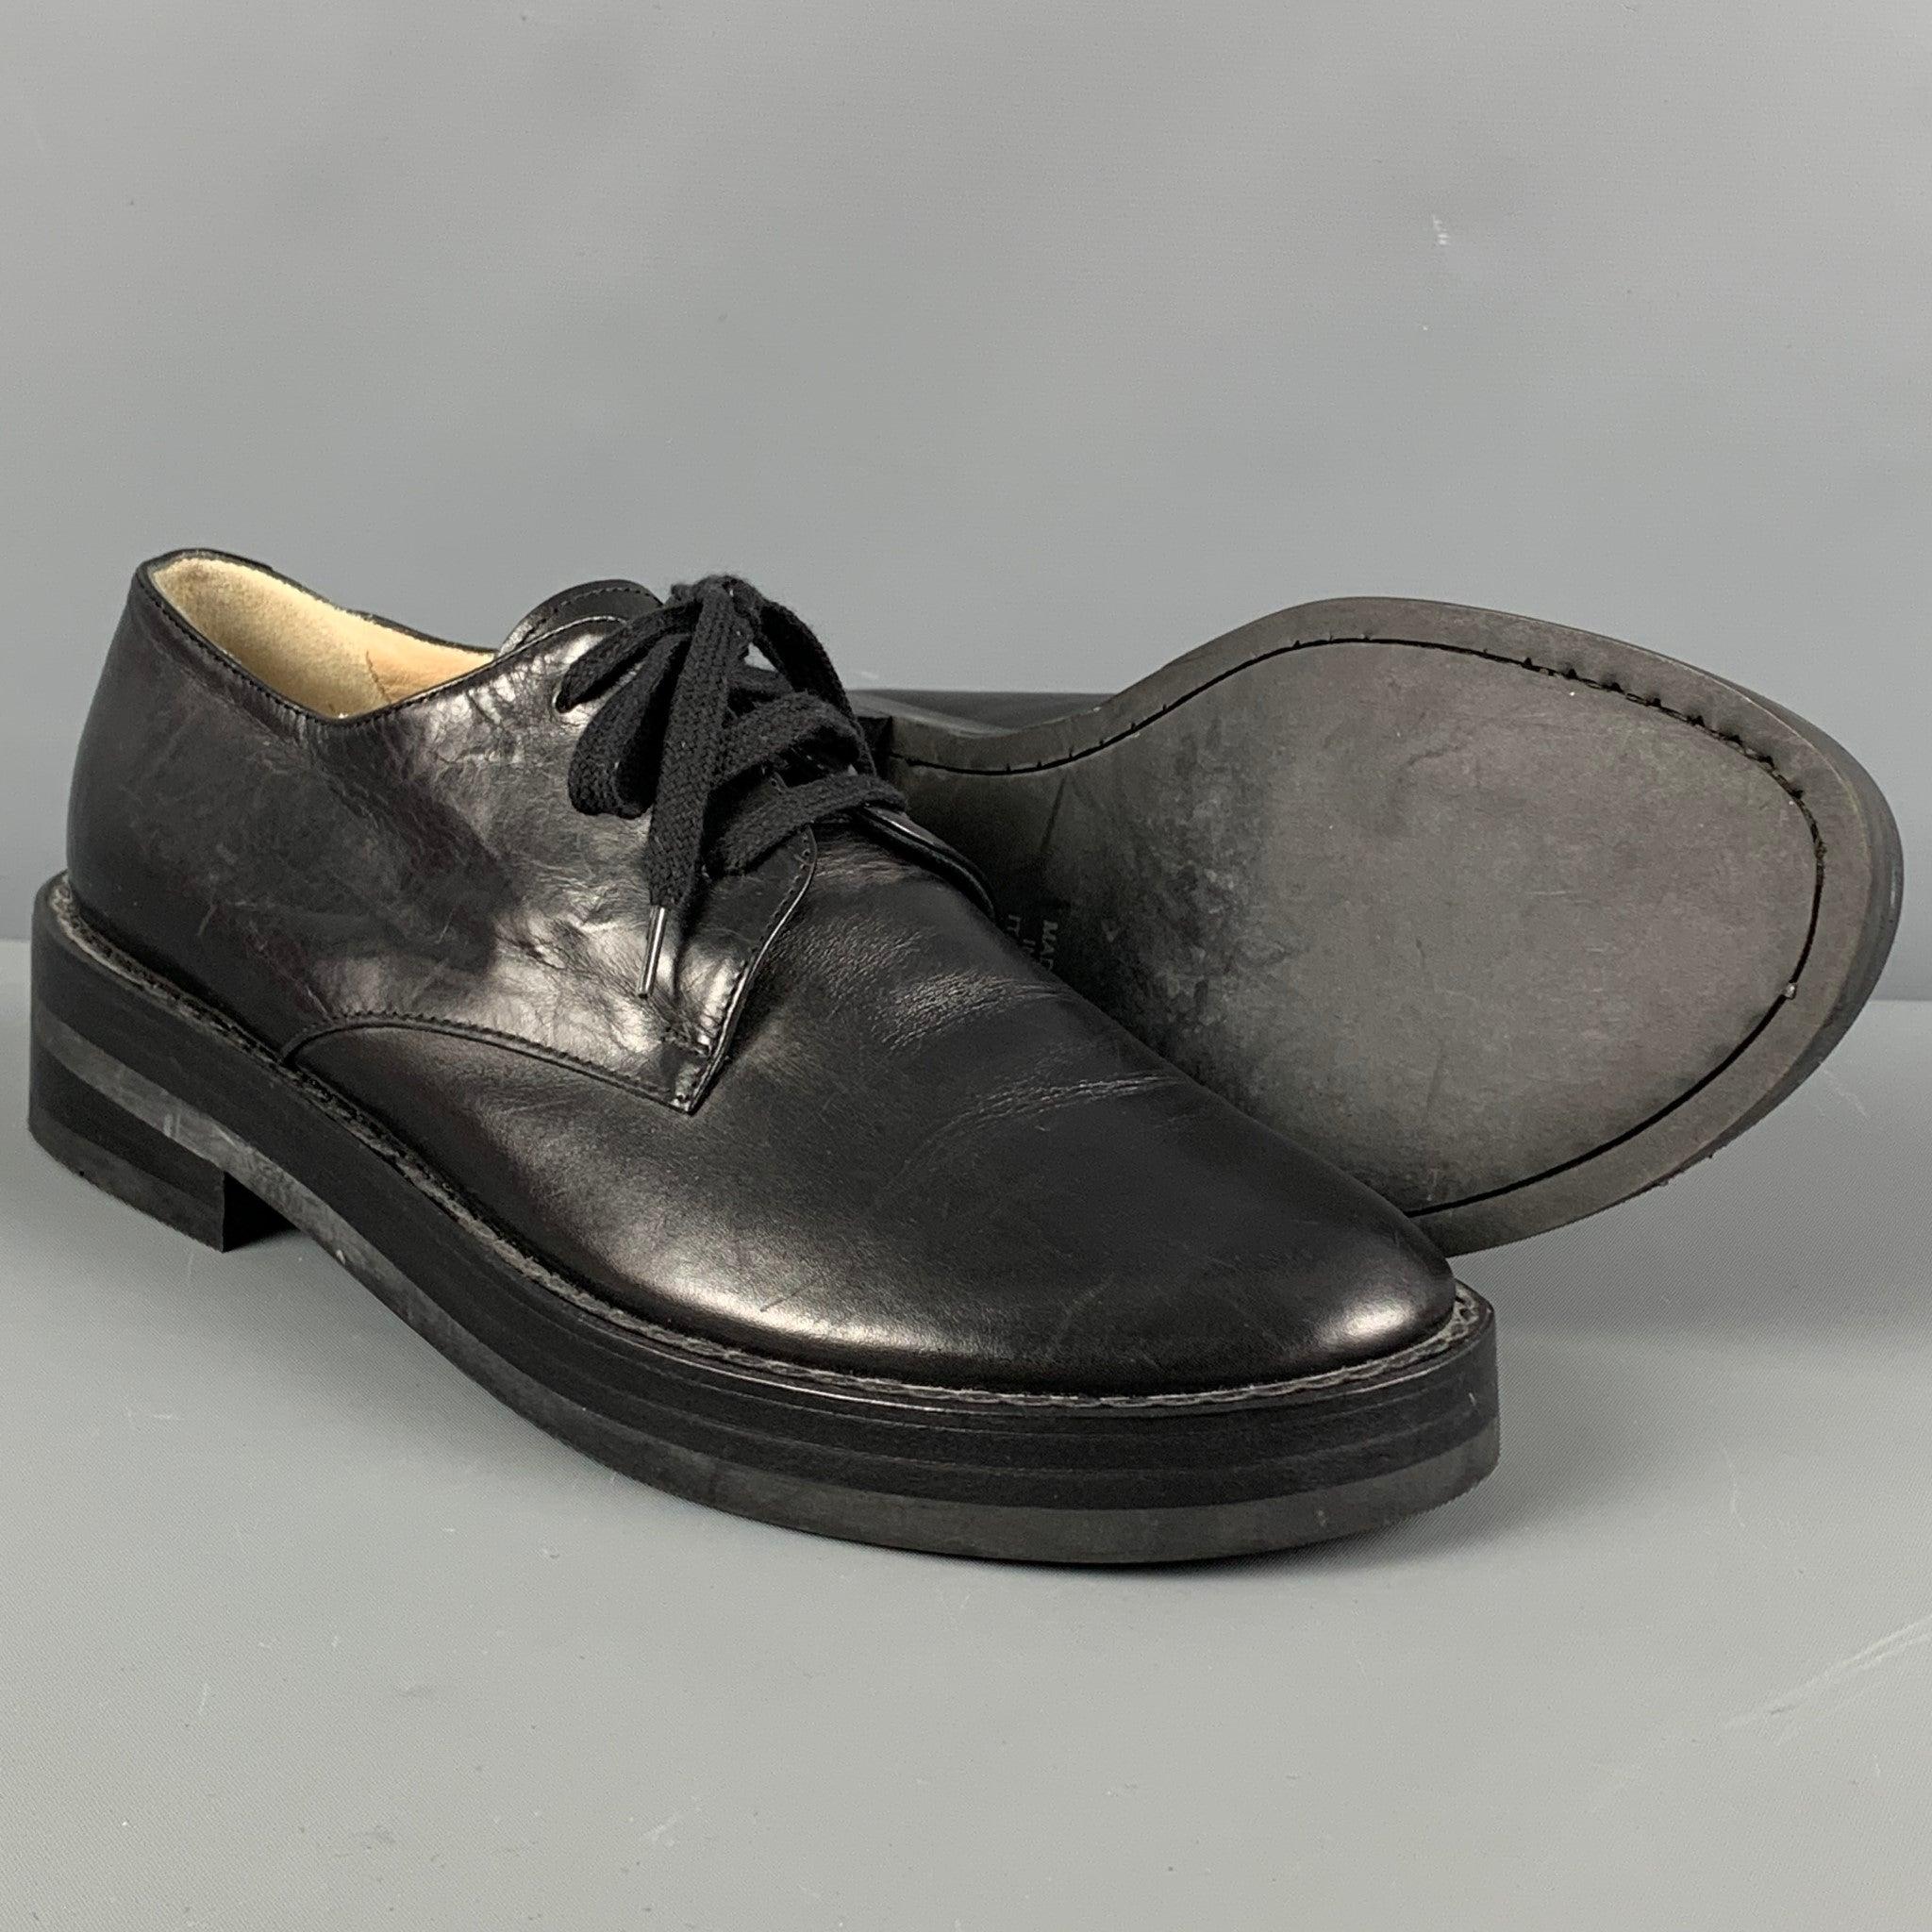 ANN DEMEULEMEESTER Size 7.5 Black Leather Platform Lace Up Shoes In Good Condition For Sale In San Francisco, CA